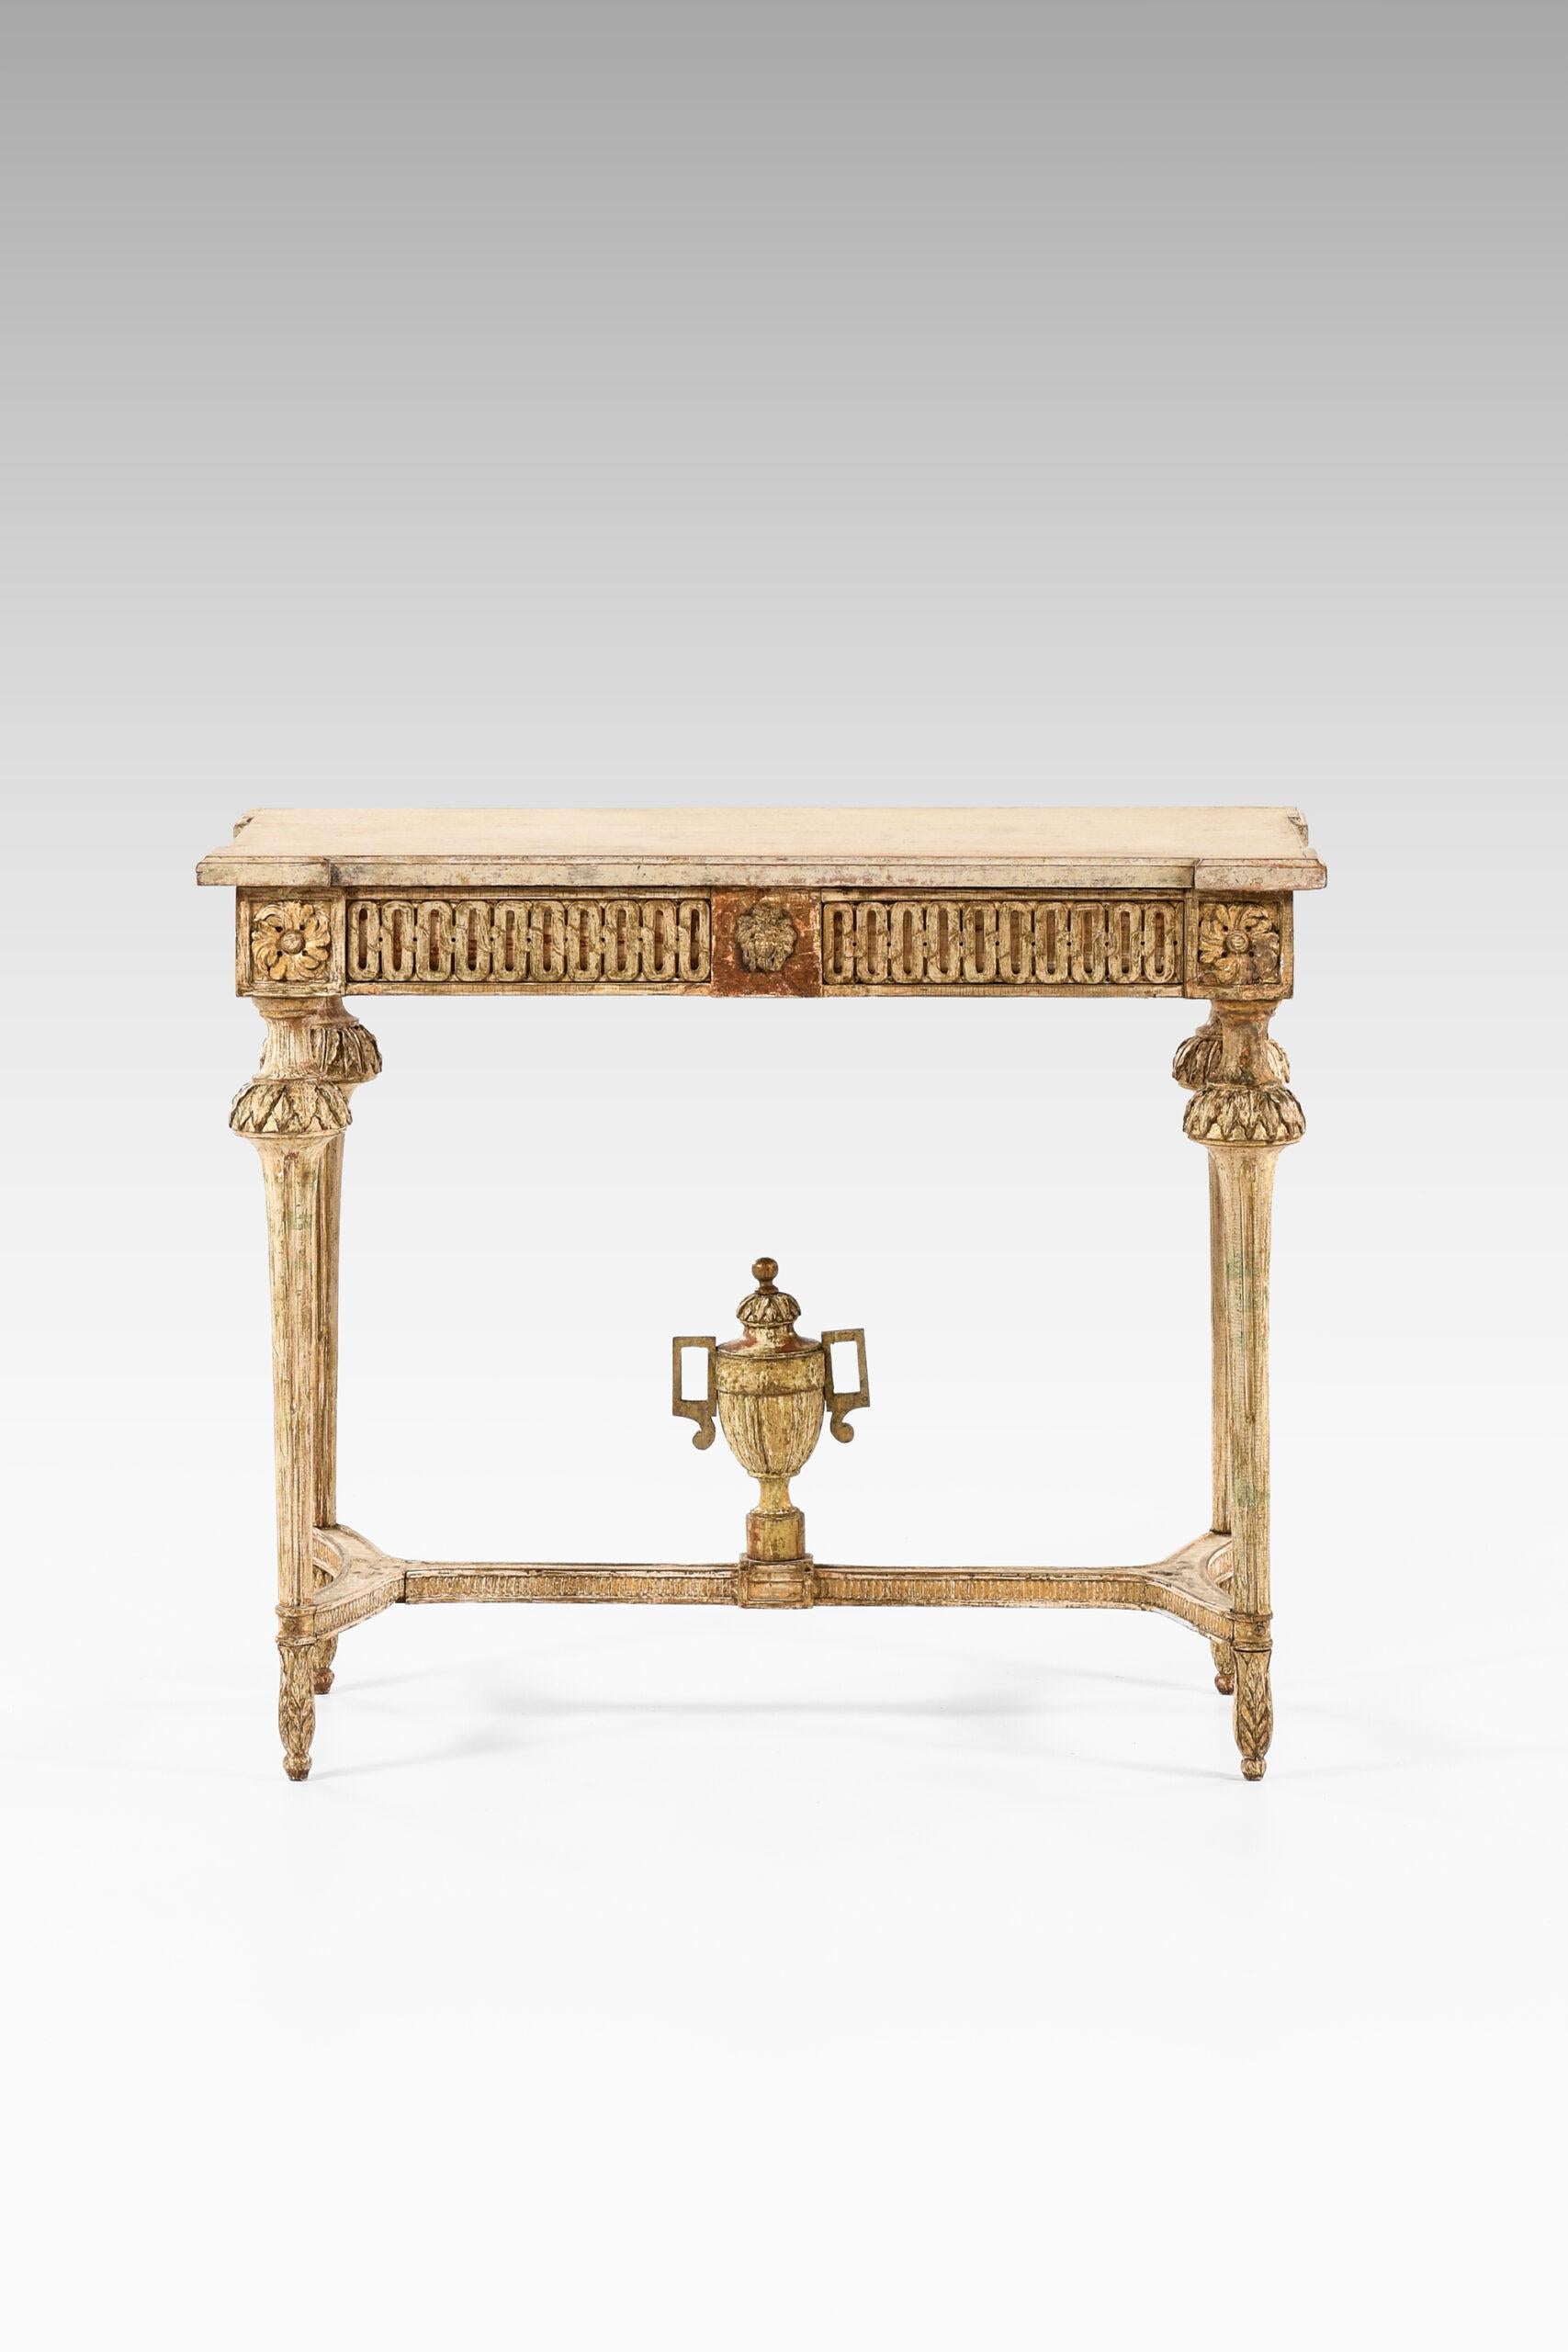 Gustavian console table. Produced in Sweden, probably in Stockholm.
Gilt wood with rich carvings with typical attributes including fluted legs, fleurons, leaves and foot cross with a classical urn. Original table top.